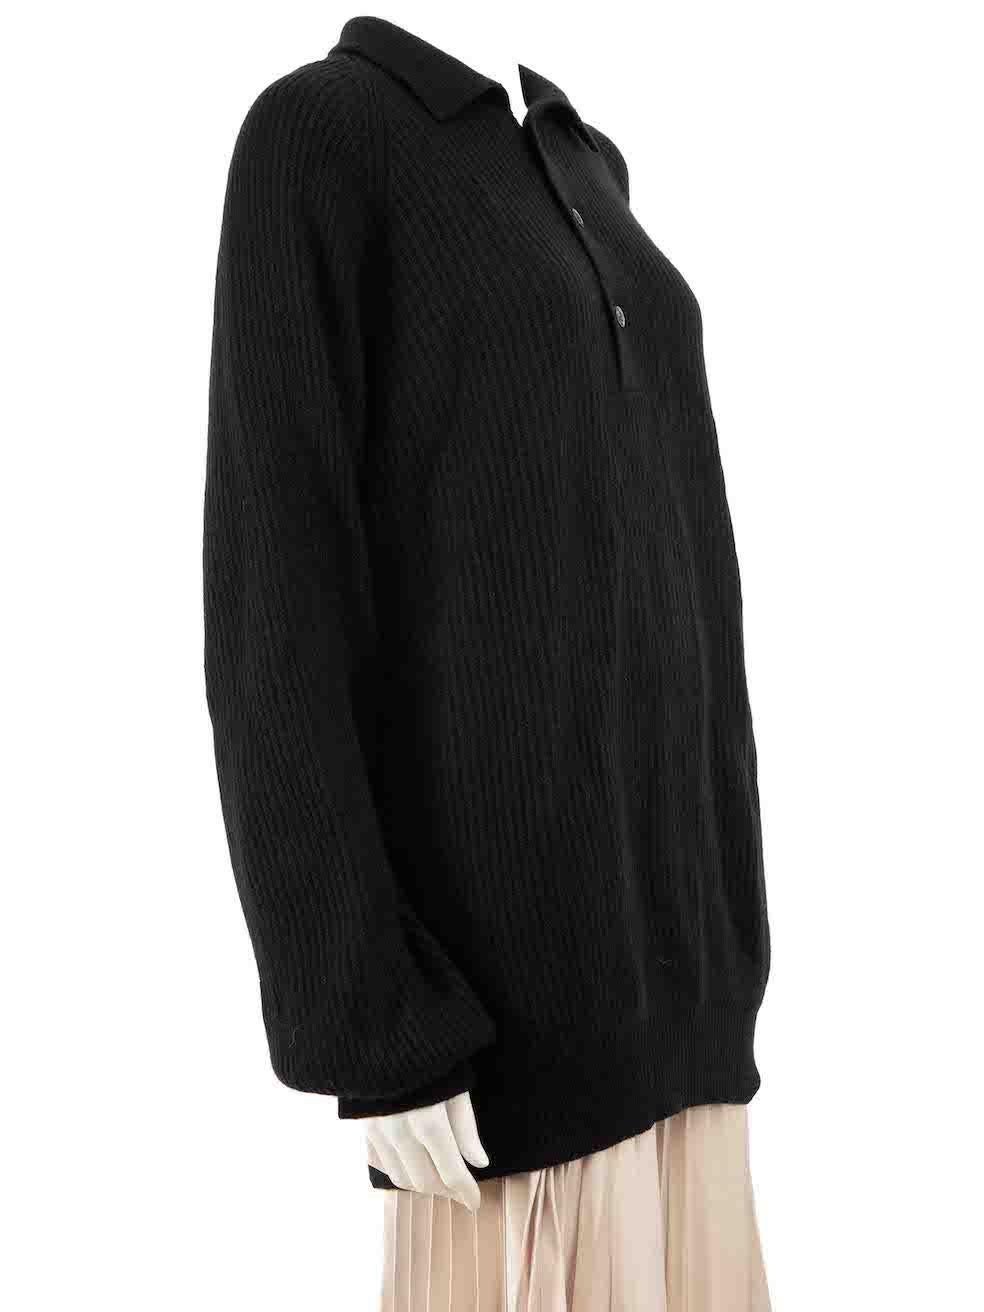 CONDITION is Very good. Hardly any visible wear to jumper is evident on this used Valentino Studio designer resale item.
 
 Details
 Unisex
 Vintage
 Black
 Cashmere
 Long sleeves jumper
 Knitted and stretchy
 Polo V neckline
 Front button up